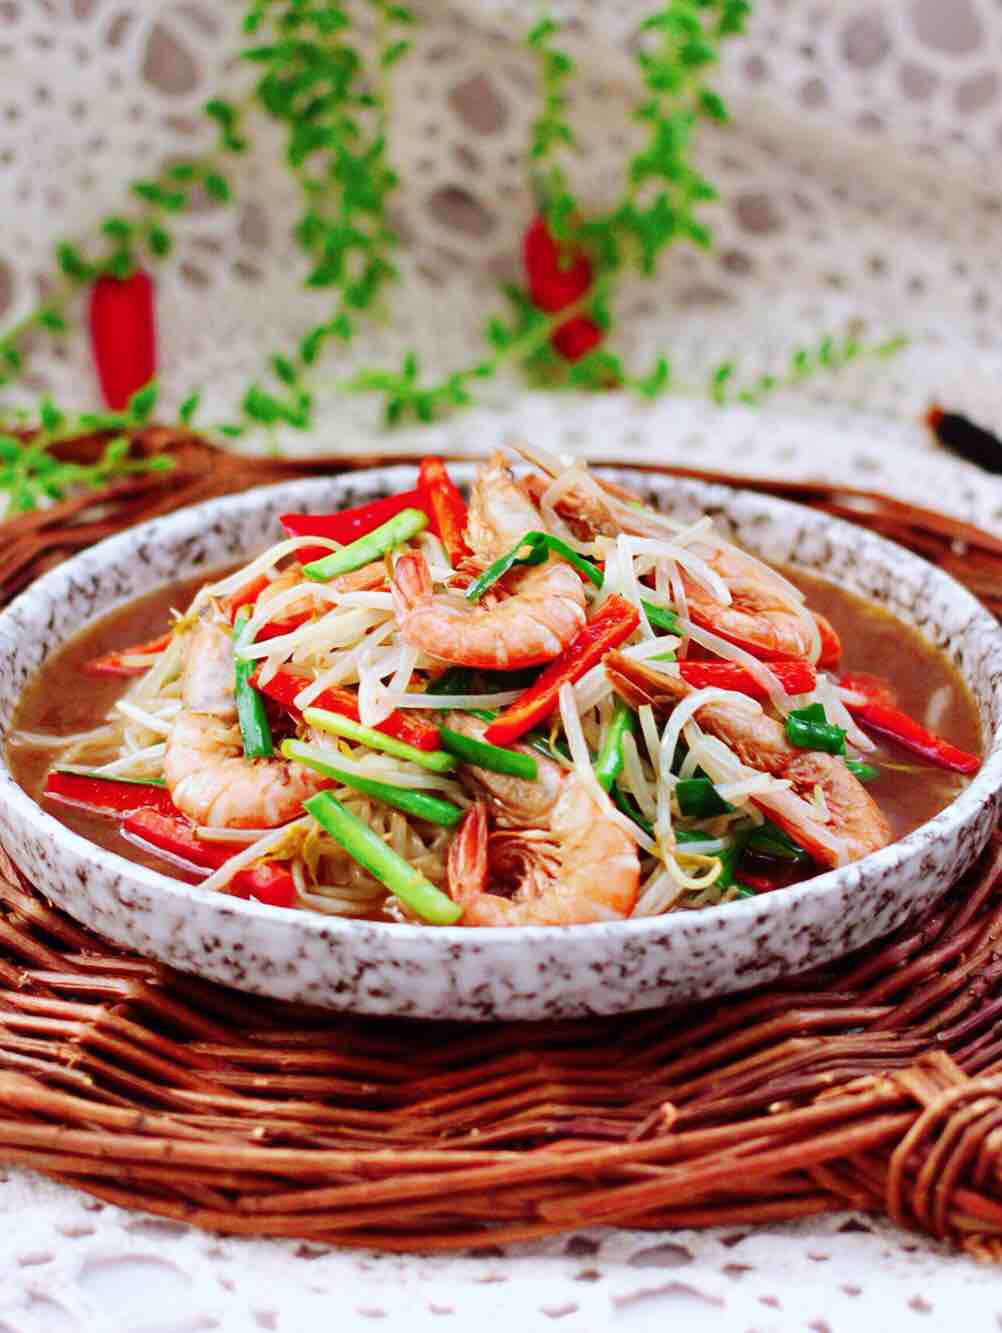 Stir-fried Red Shrimp with Mung Bean Sprouts